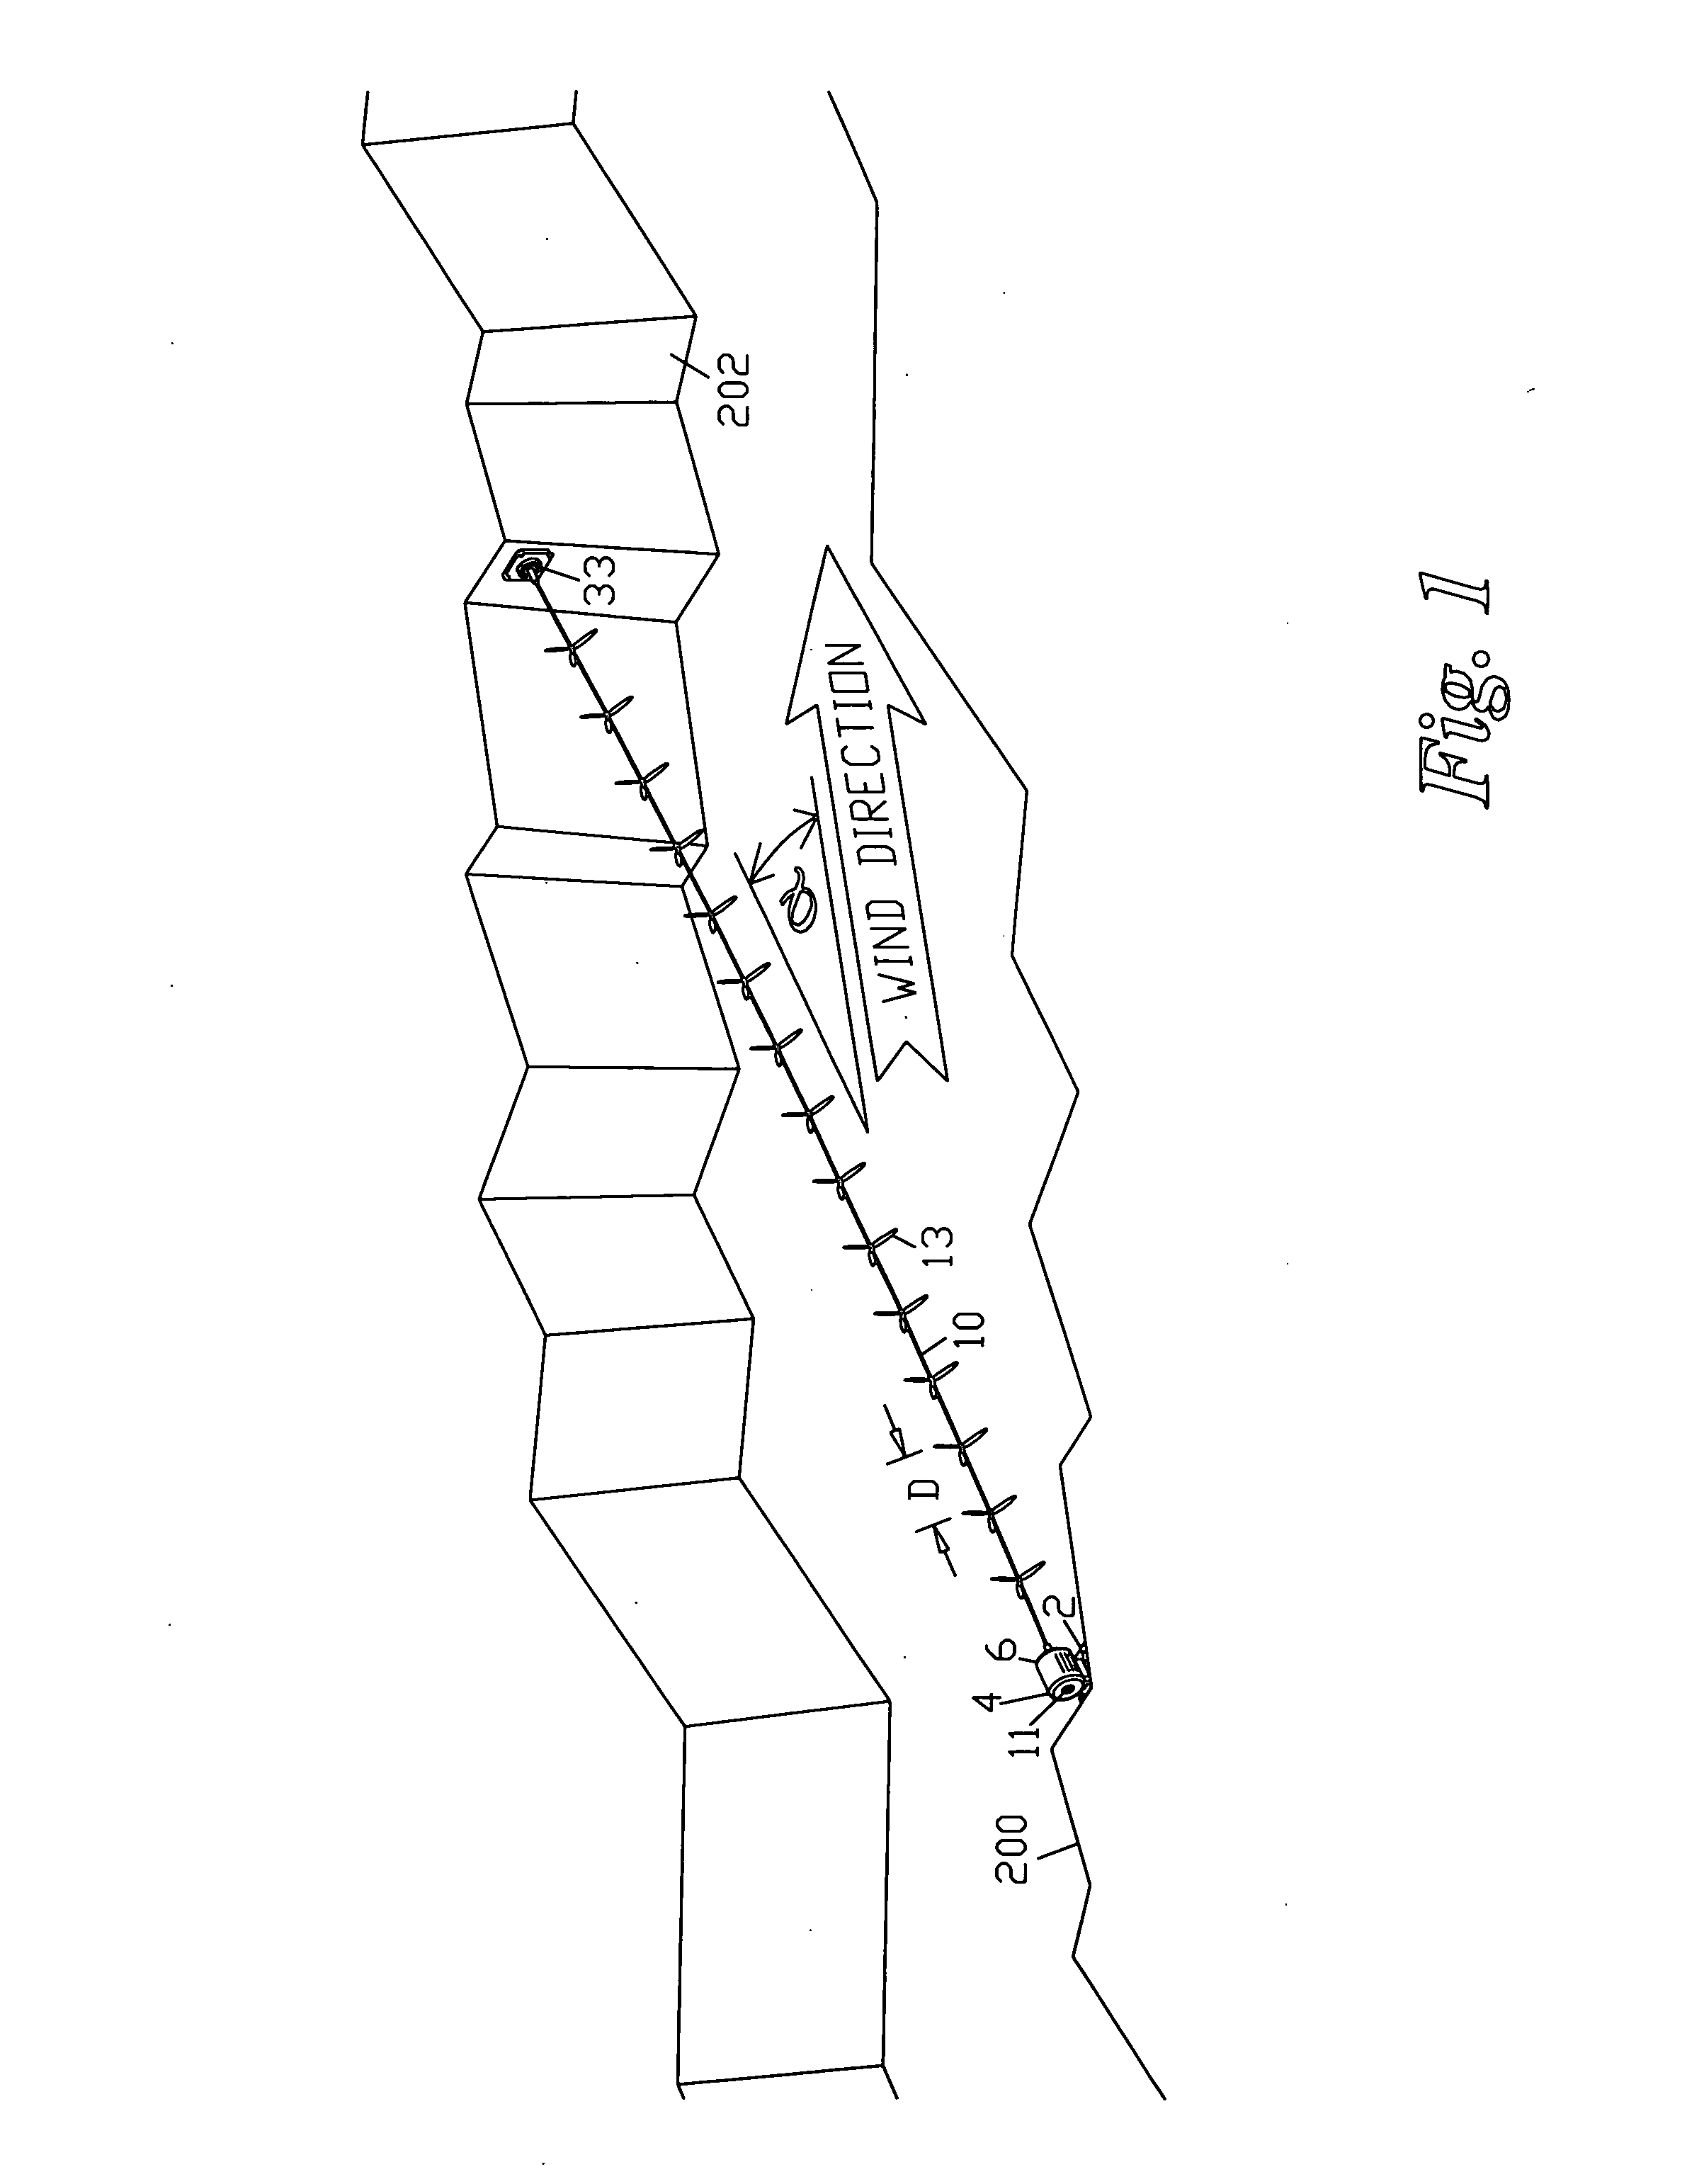 Stationary co-axial multi-rotor wind turbine supported by continuous central driveshaft